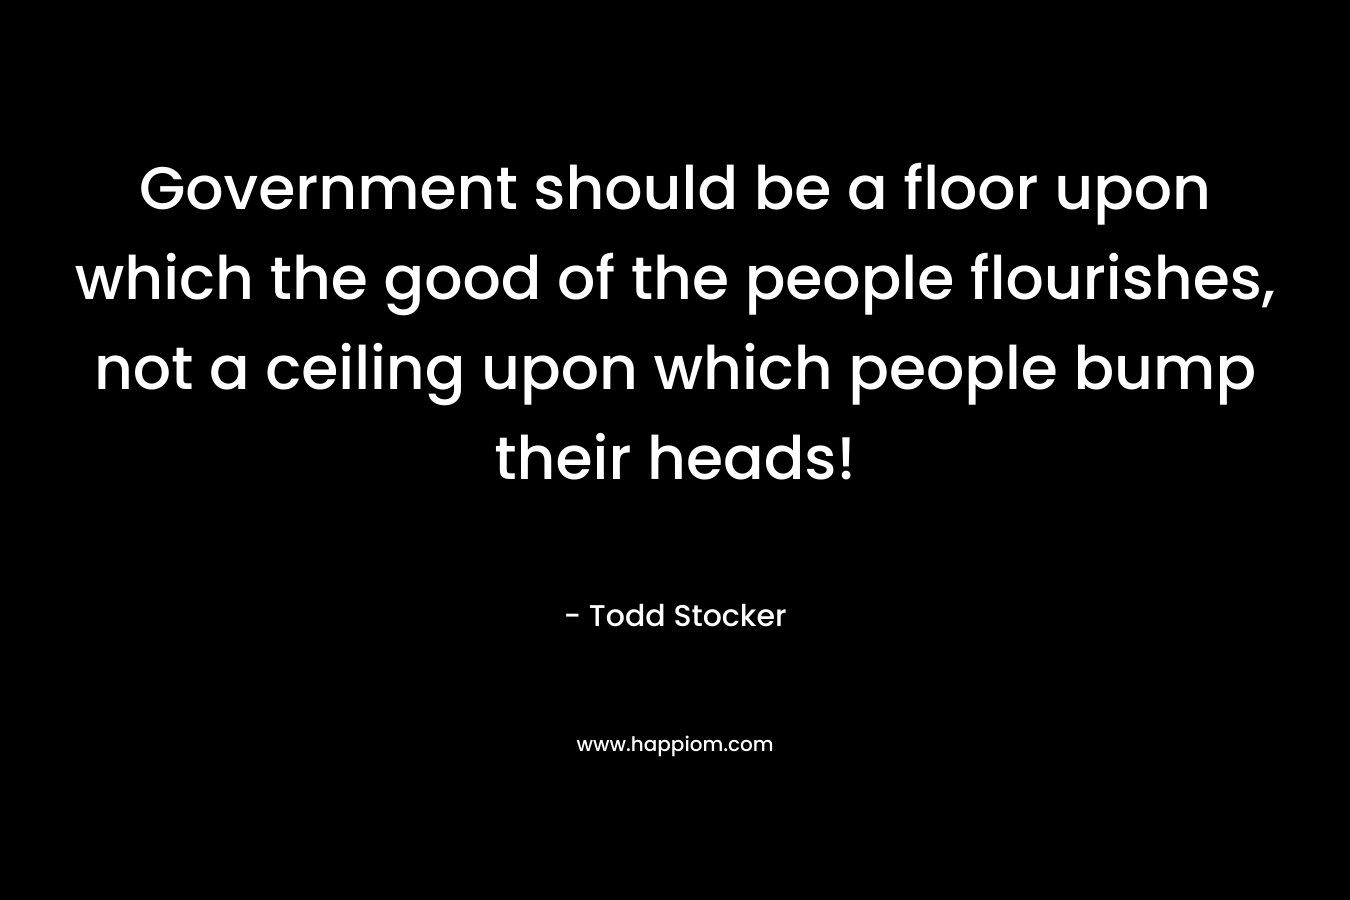 Government should be a floor upon which the good of the people flourishes, not a ceiling upon which people bump their heads! – Todd Stocker